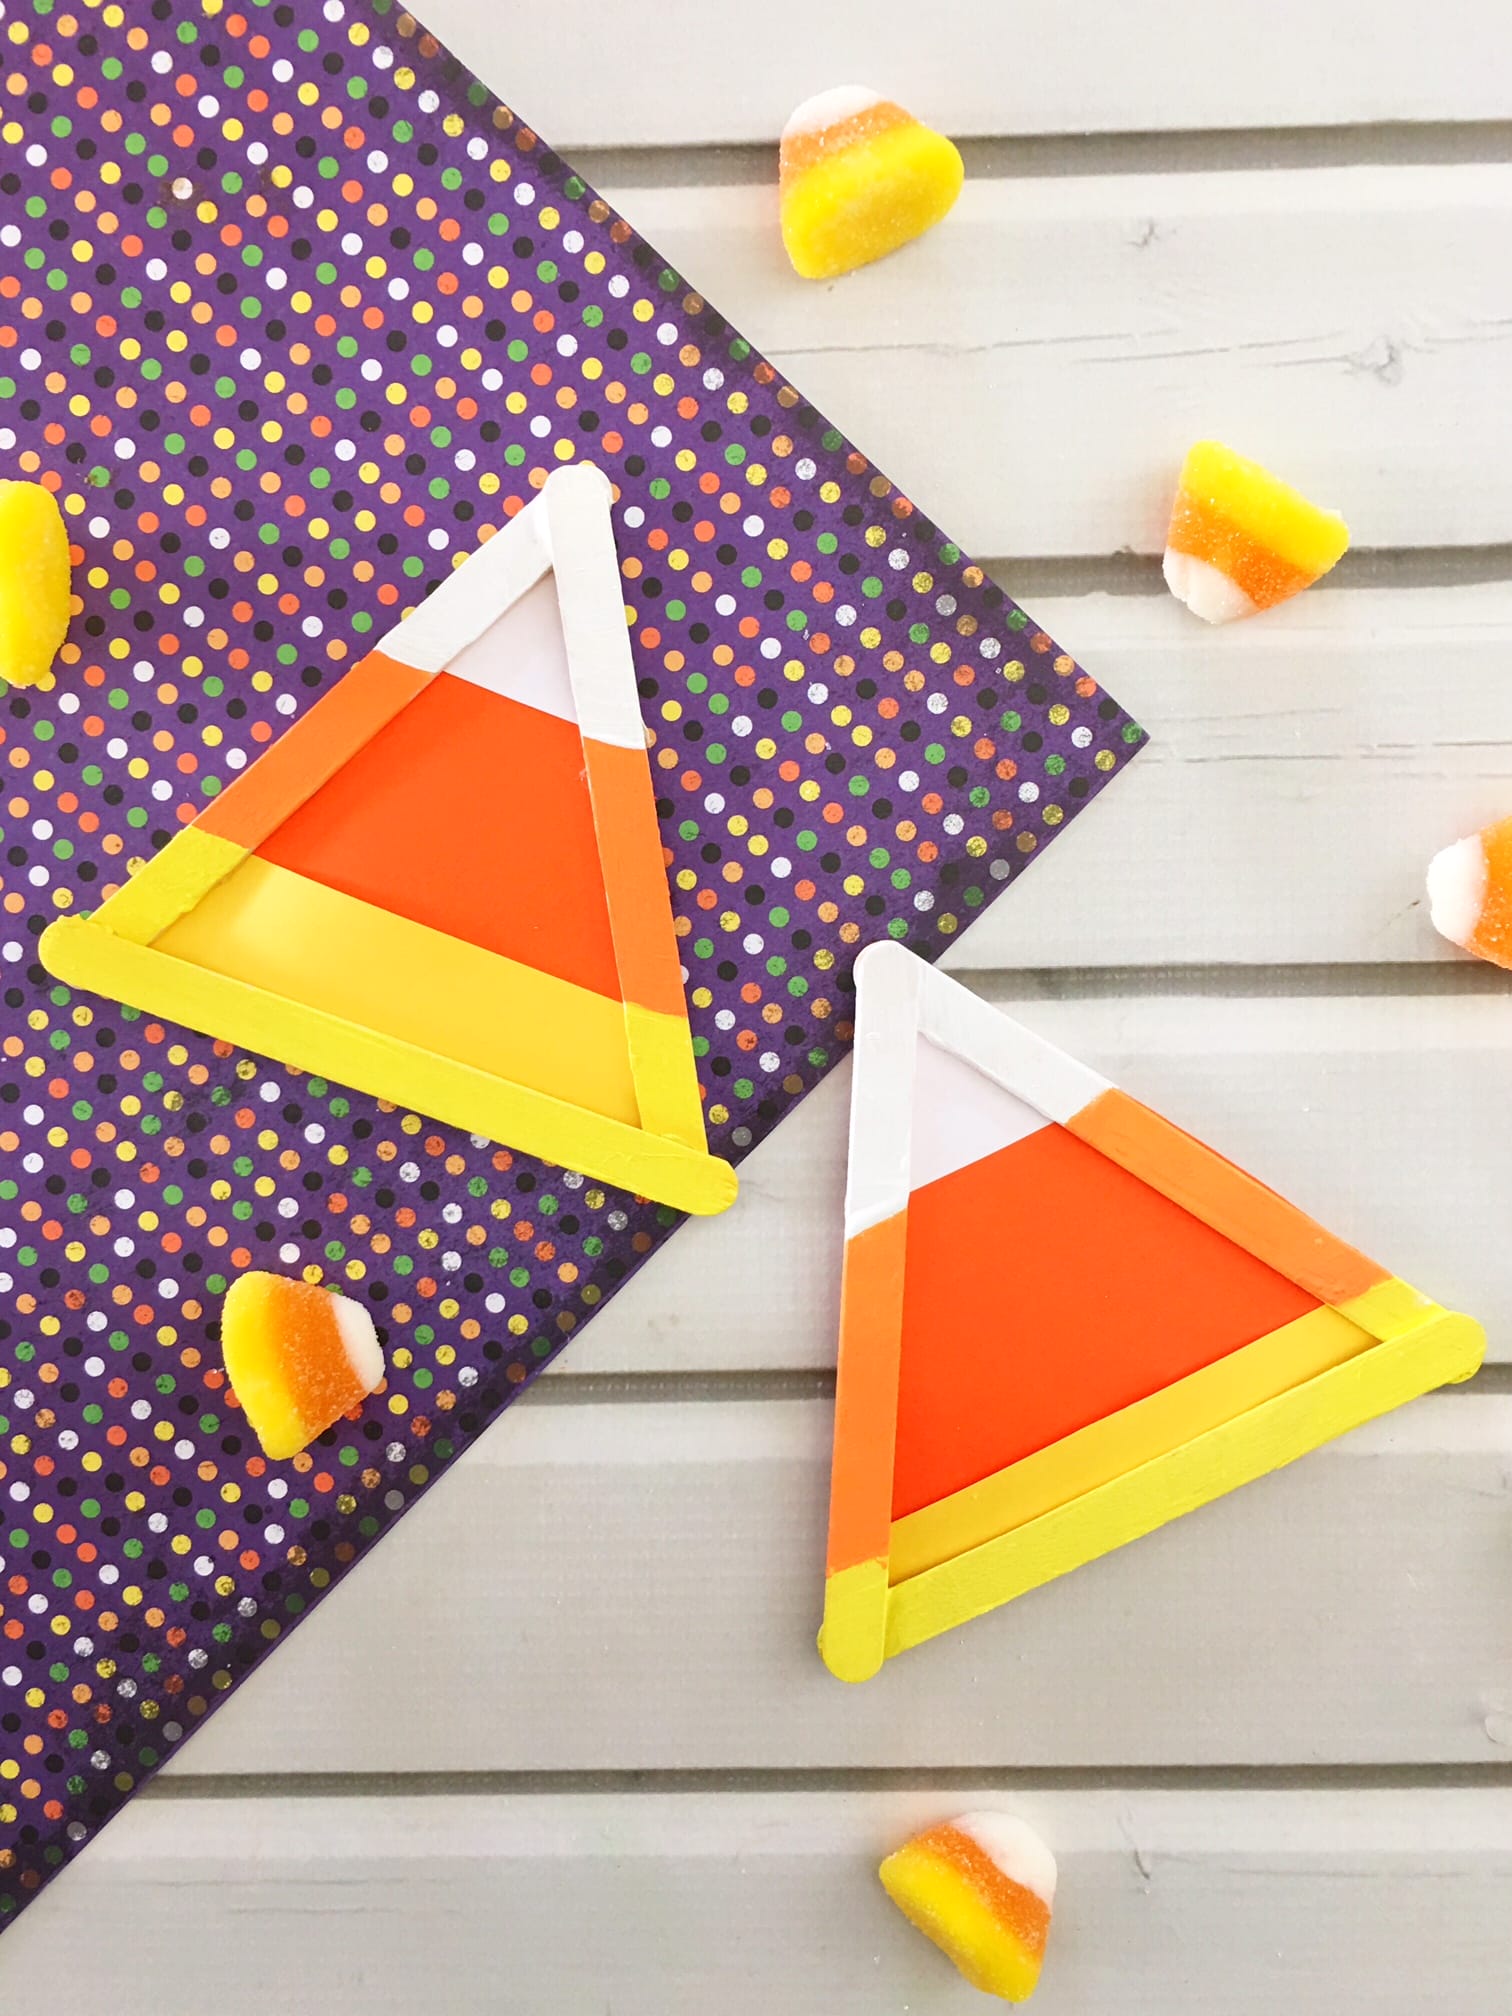 Fall is here. Kids will love this simple candy corn craft that is inexpensive and simple to make. Most of the supplies you need are already on hand.